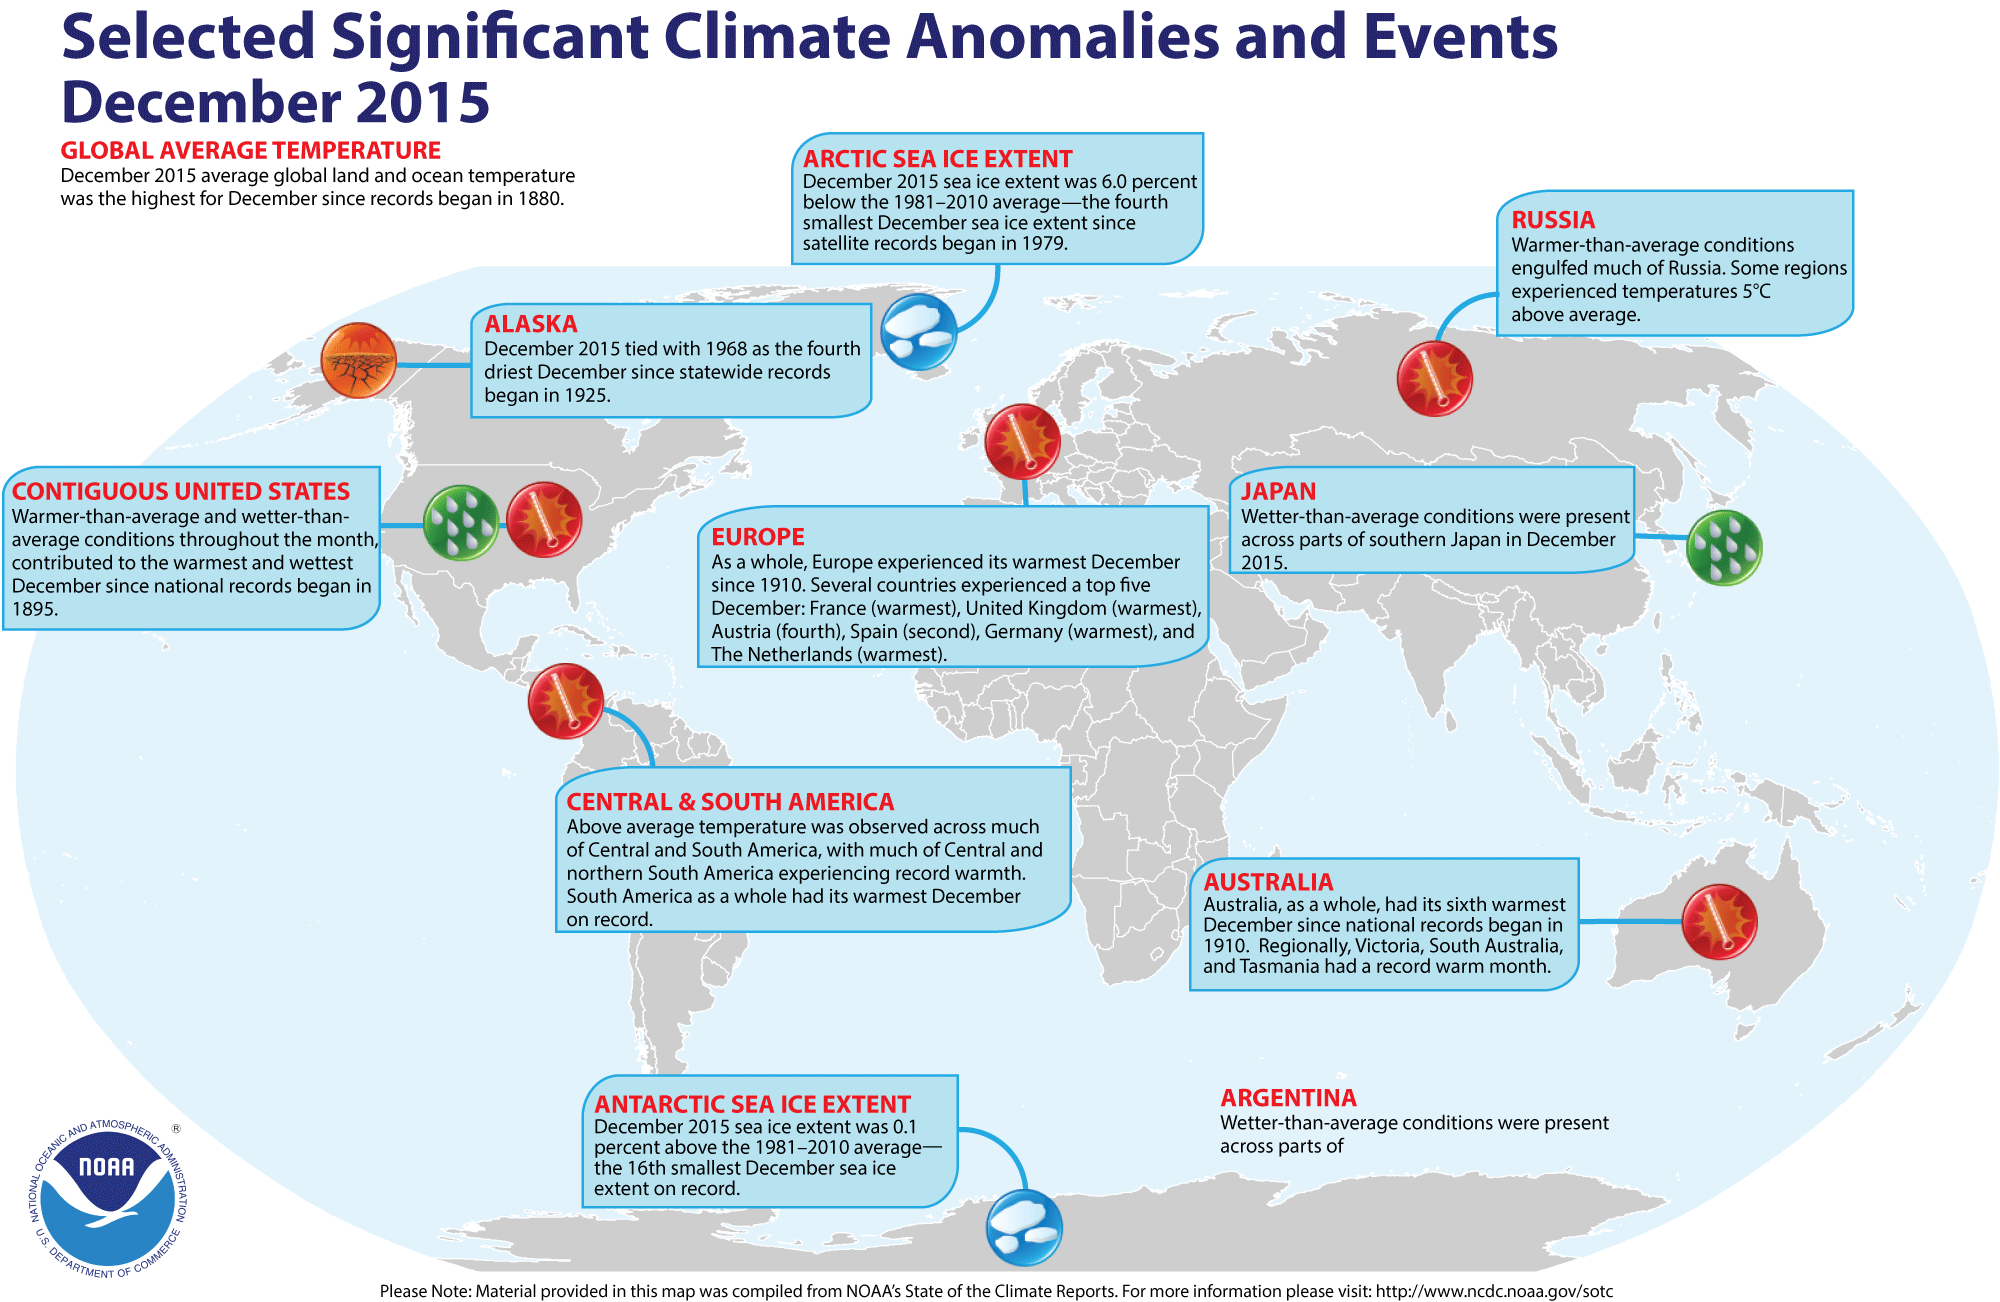 http://www.ncdc.noaa.gov/sotc/service/global/extremes/201512.gif